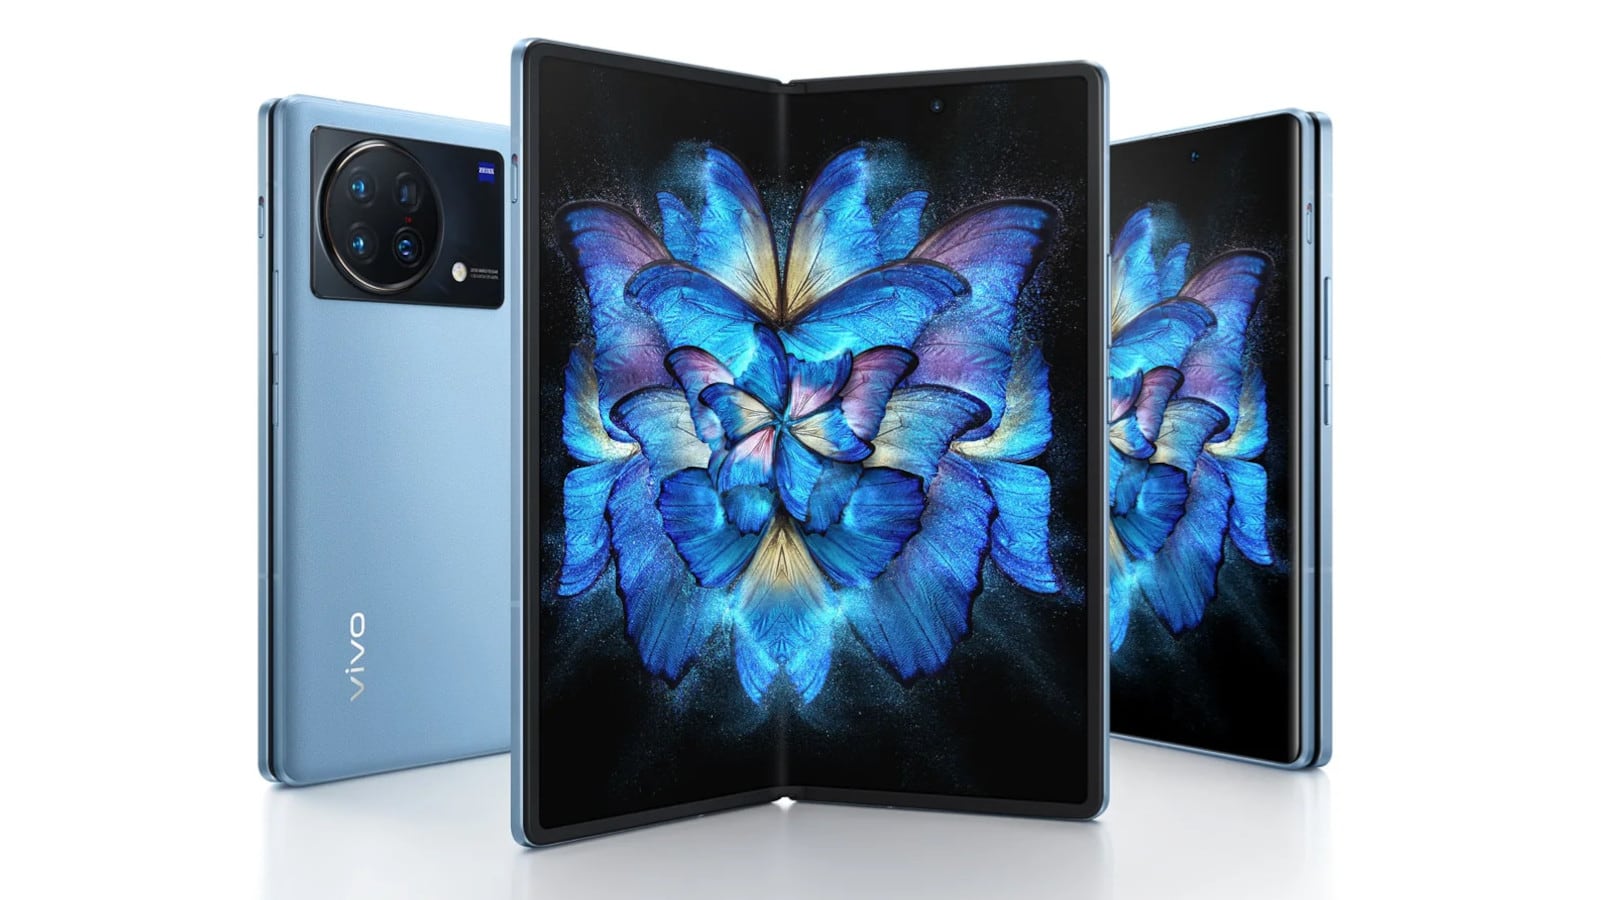 vivo launches its first foldable smartphone, X Fold, in China